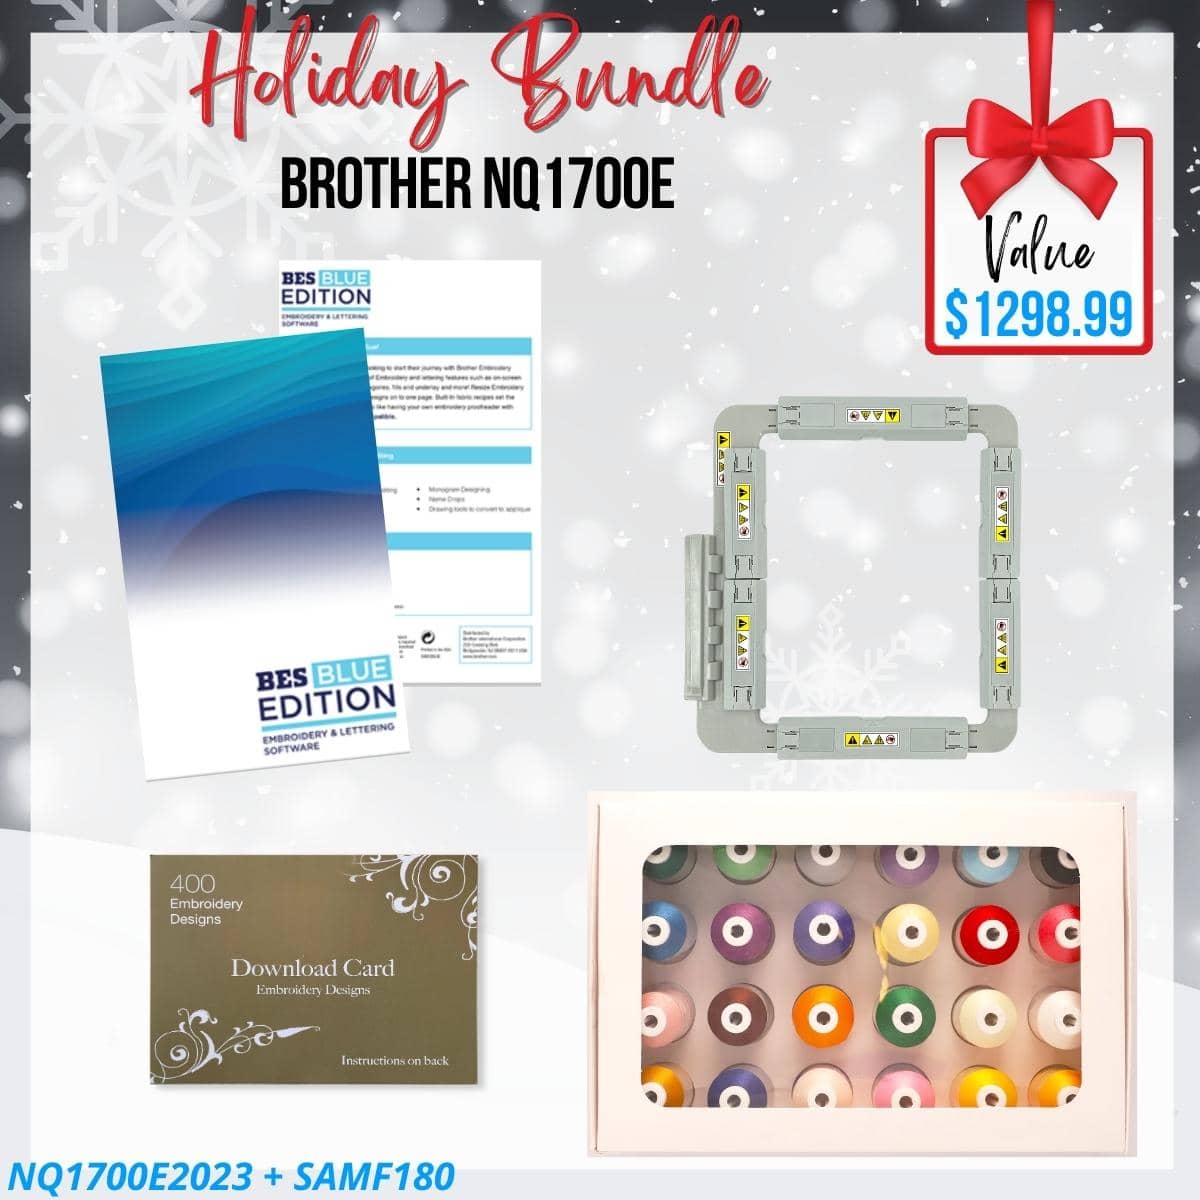 Brother NQ1700E Bundle for Black Friday Holiday sale